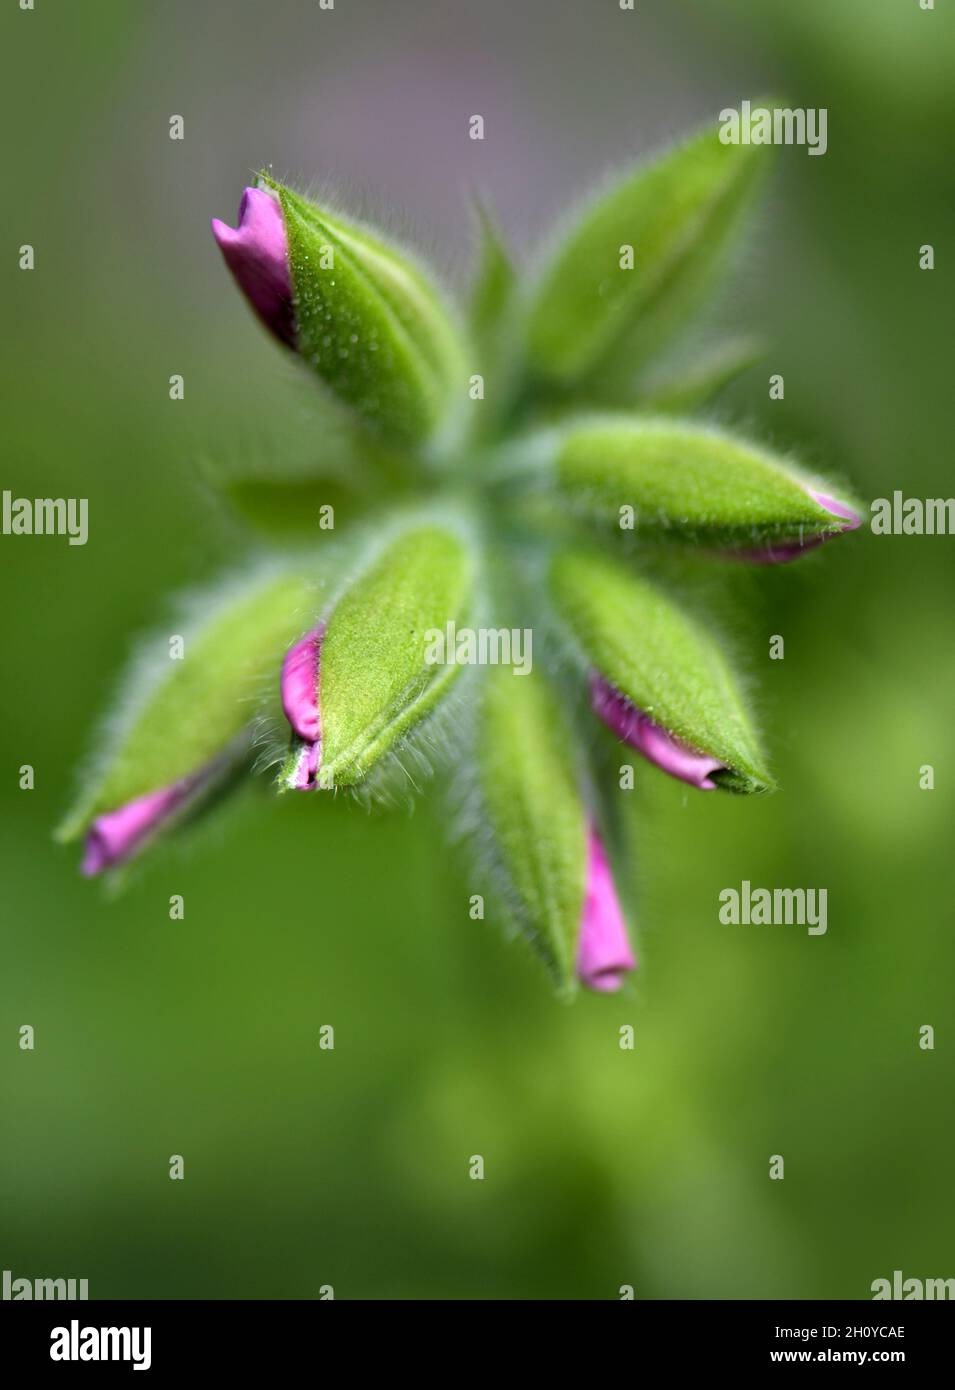 Geranium buds just about to bloom with pink flowers. Macro image Stock Photo